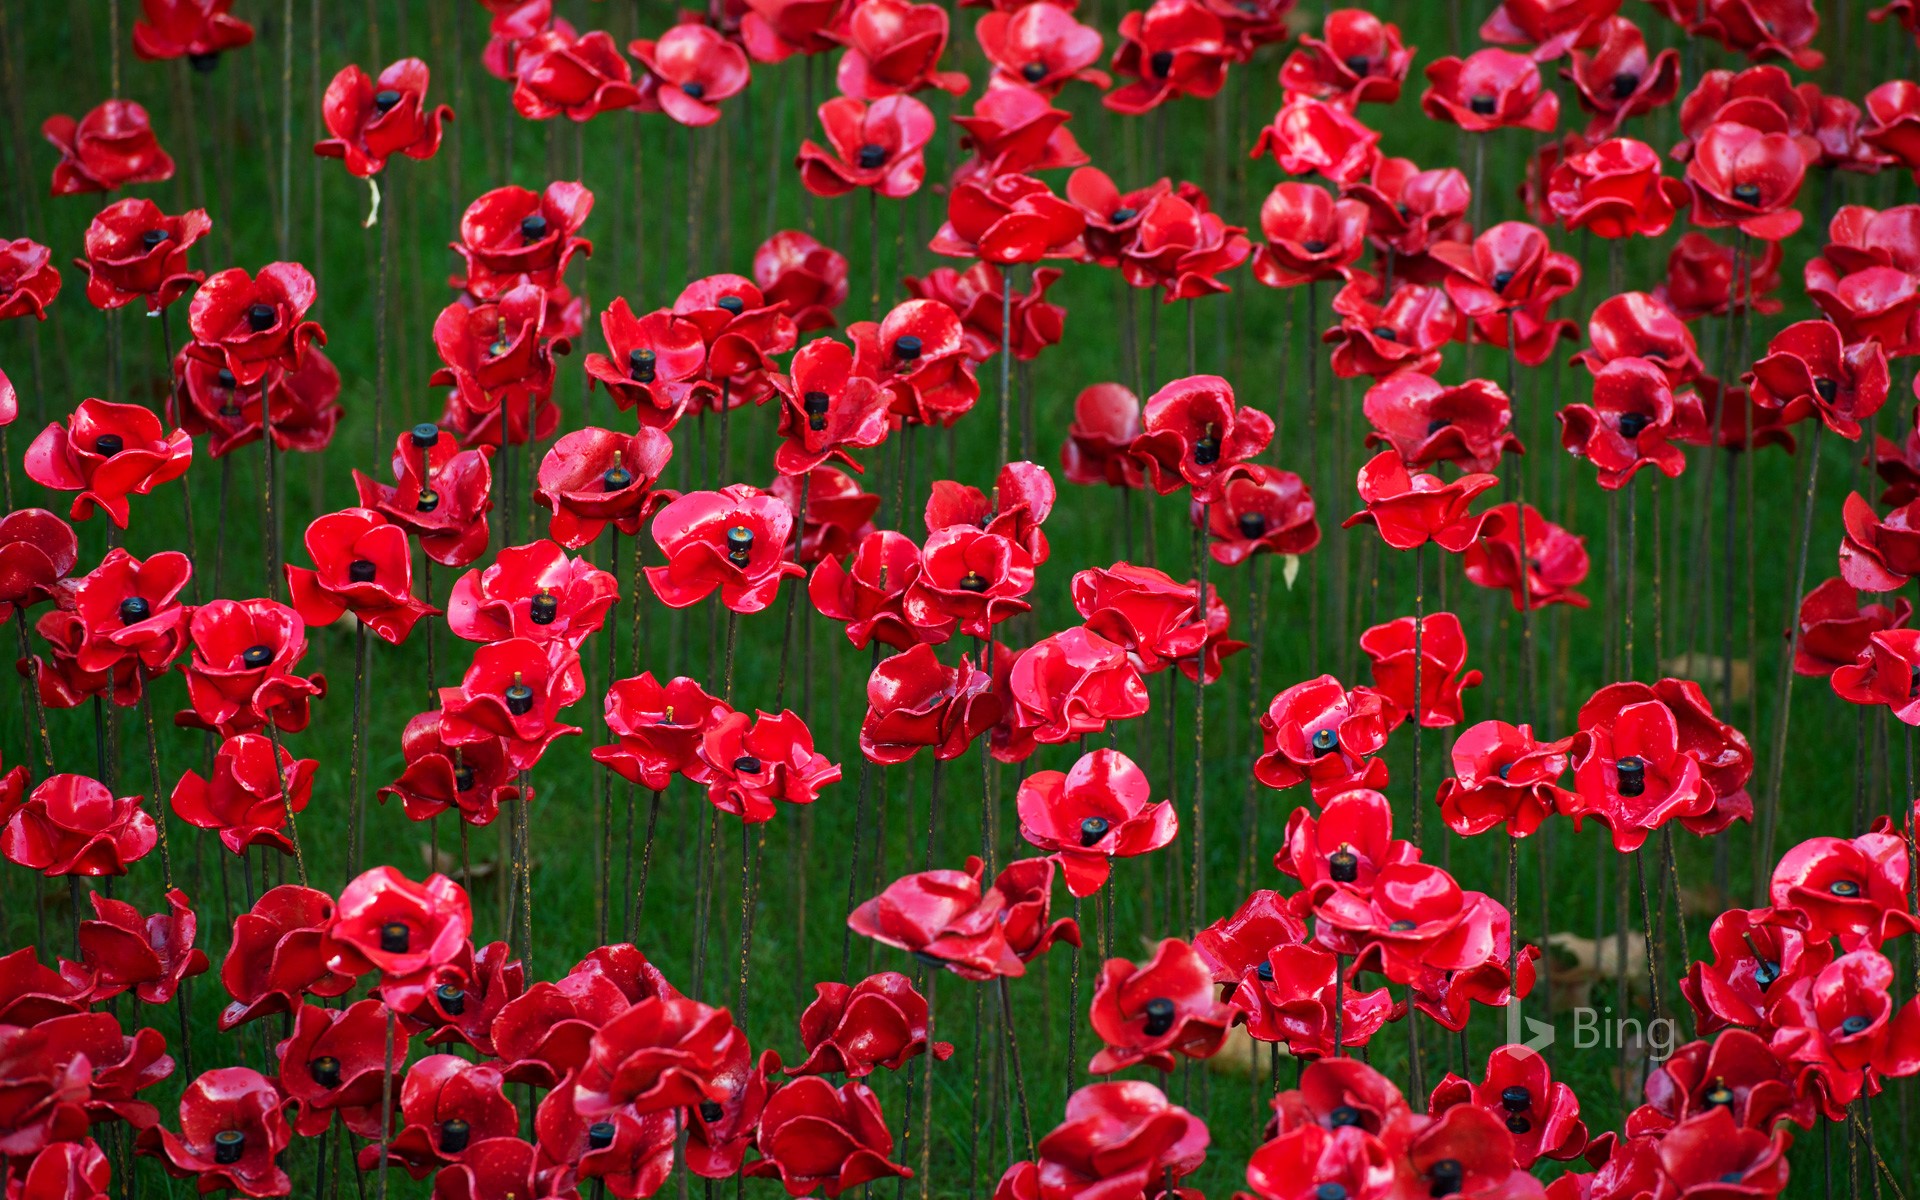 Poppy display at the Tower of London